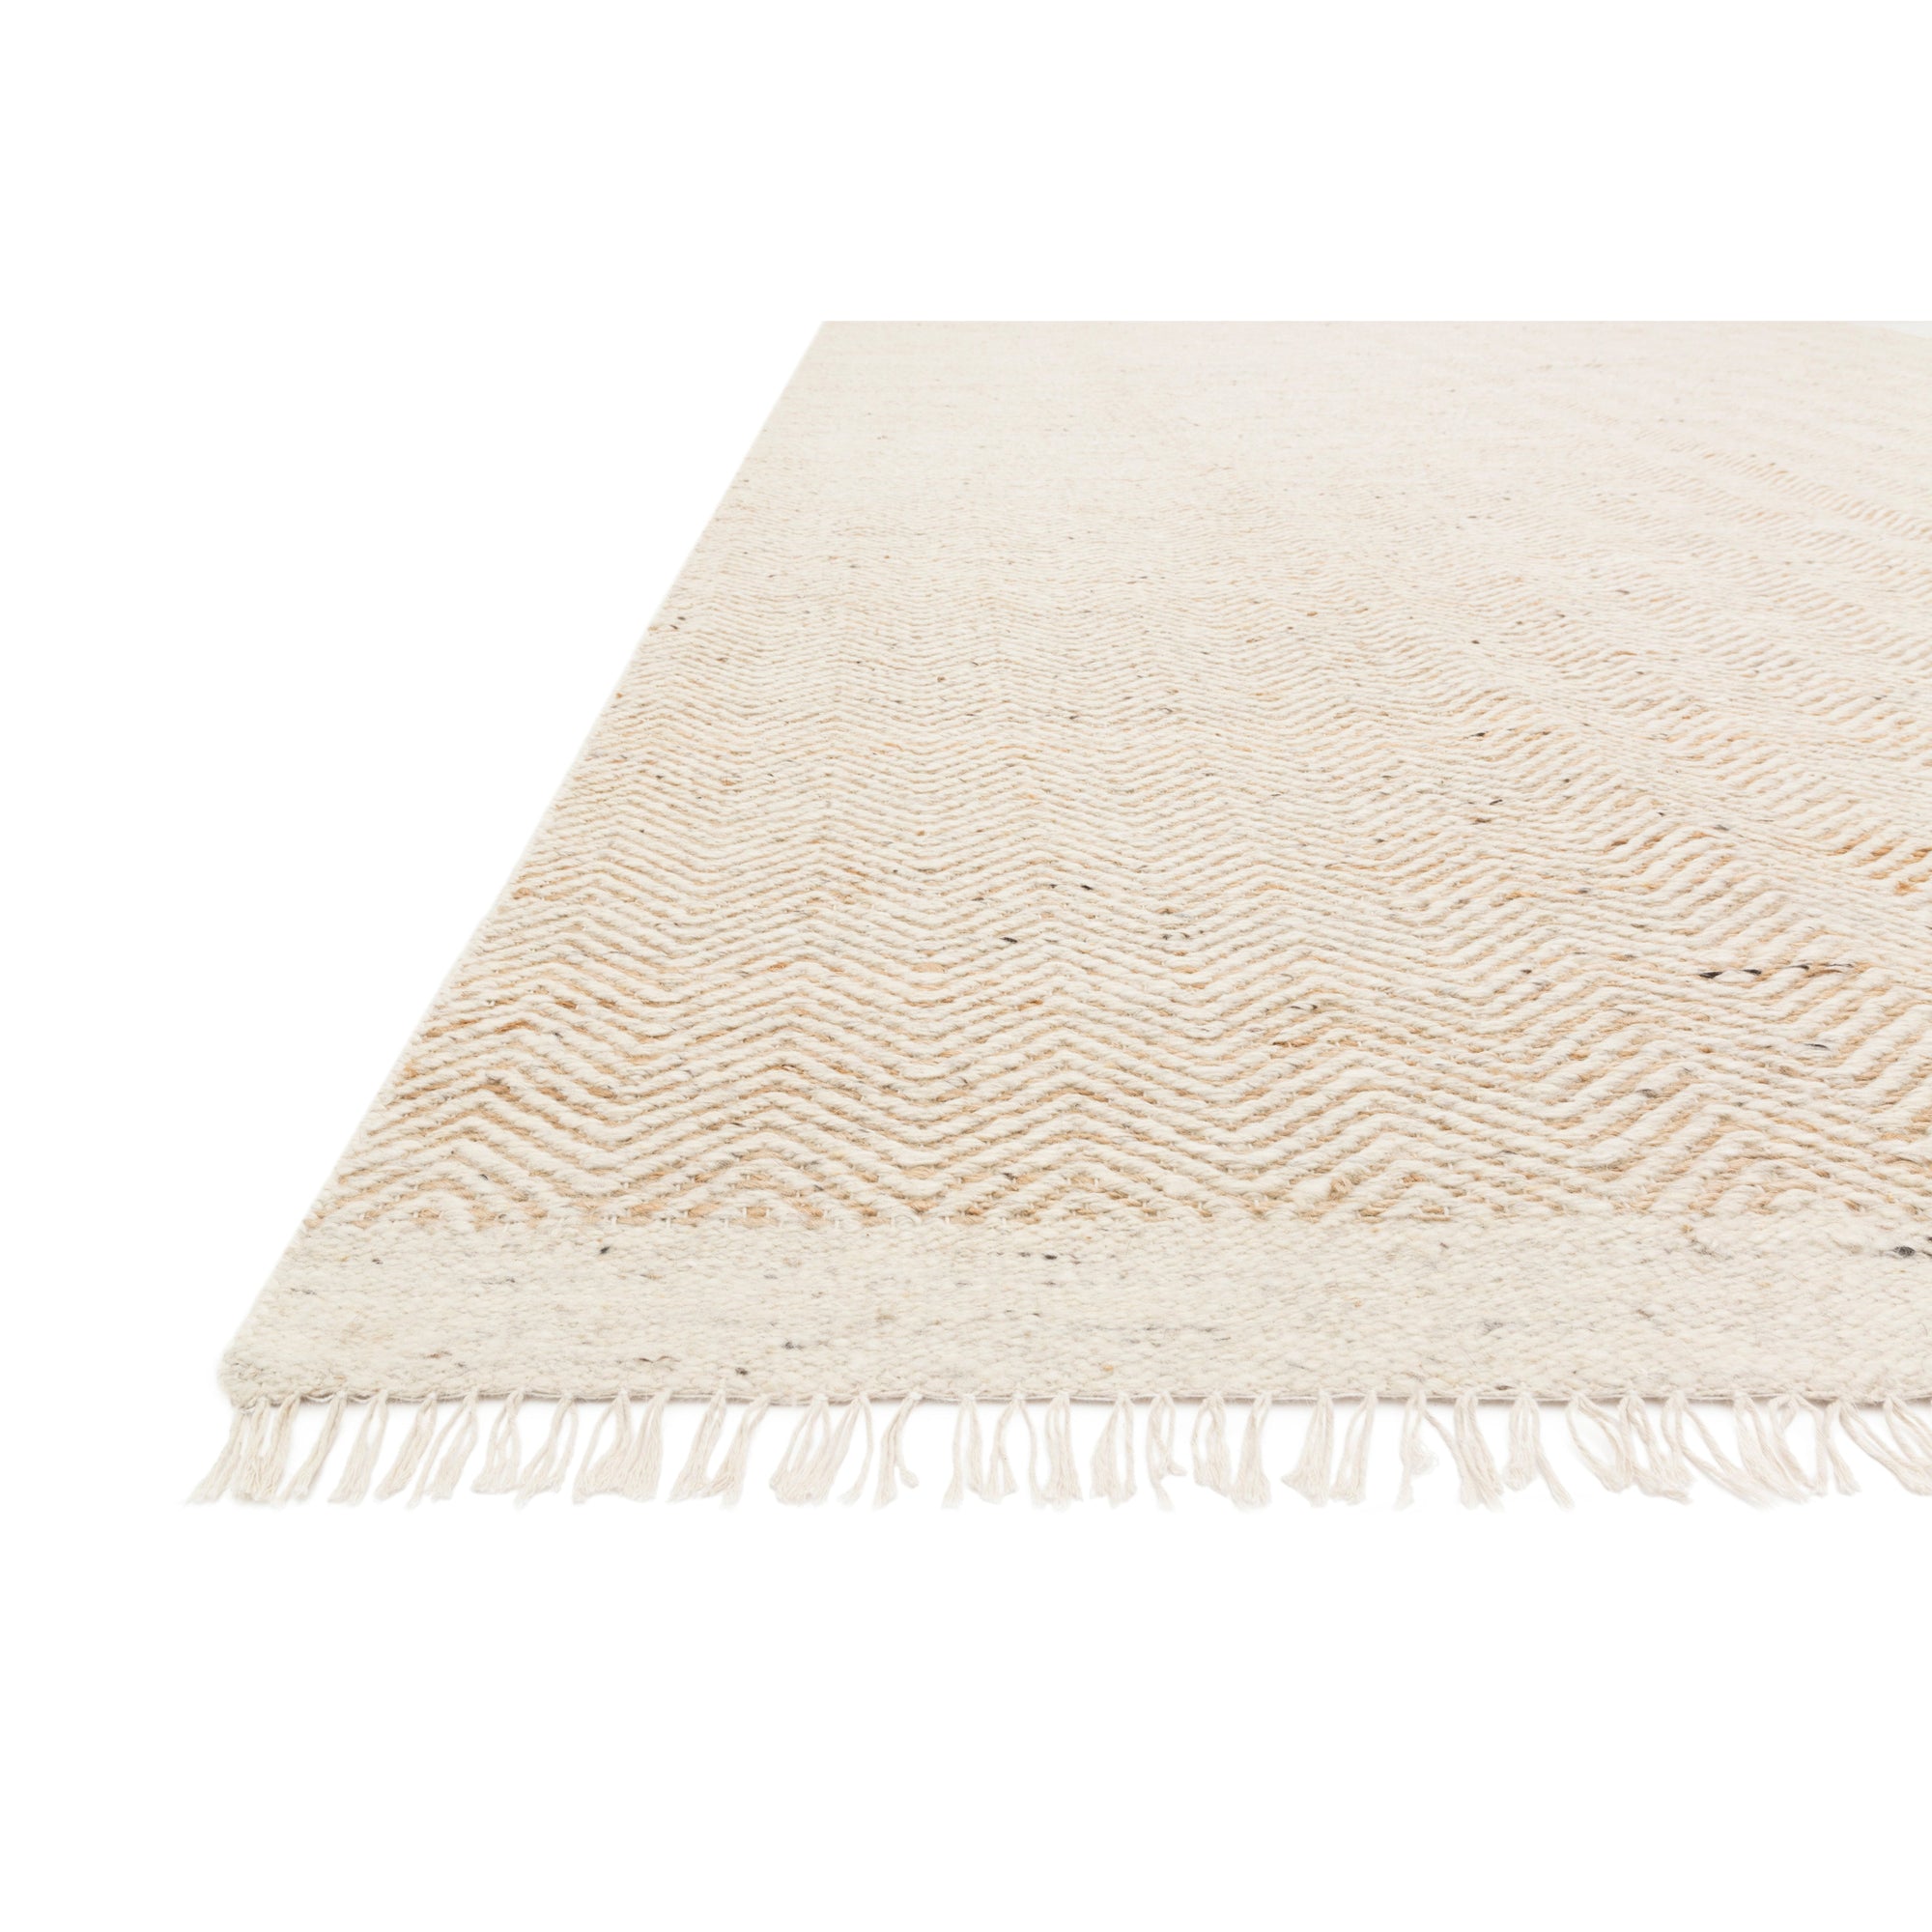 Rugs by Roo Loloi Omen Natural Area Rug in size 3' 6" x 5' 6"